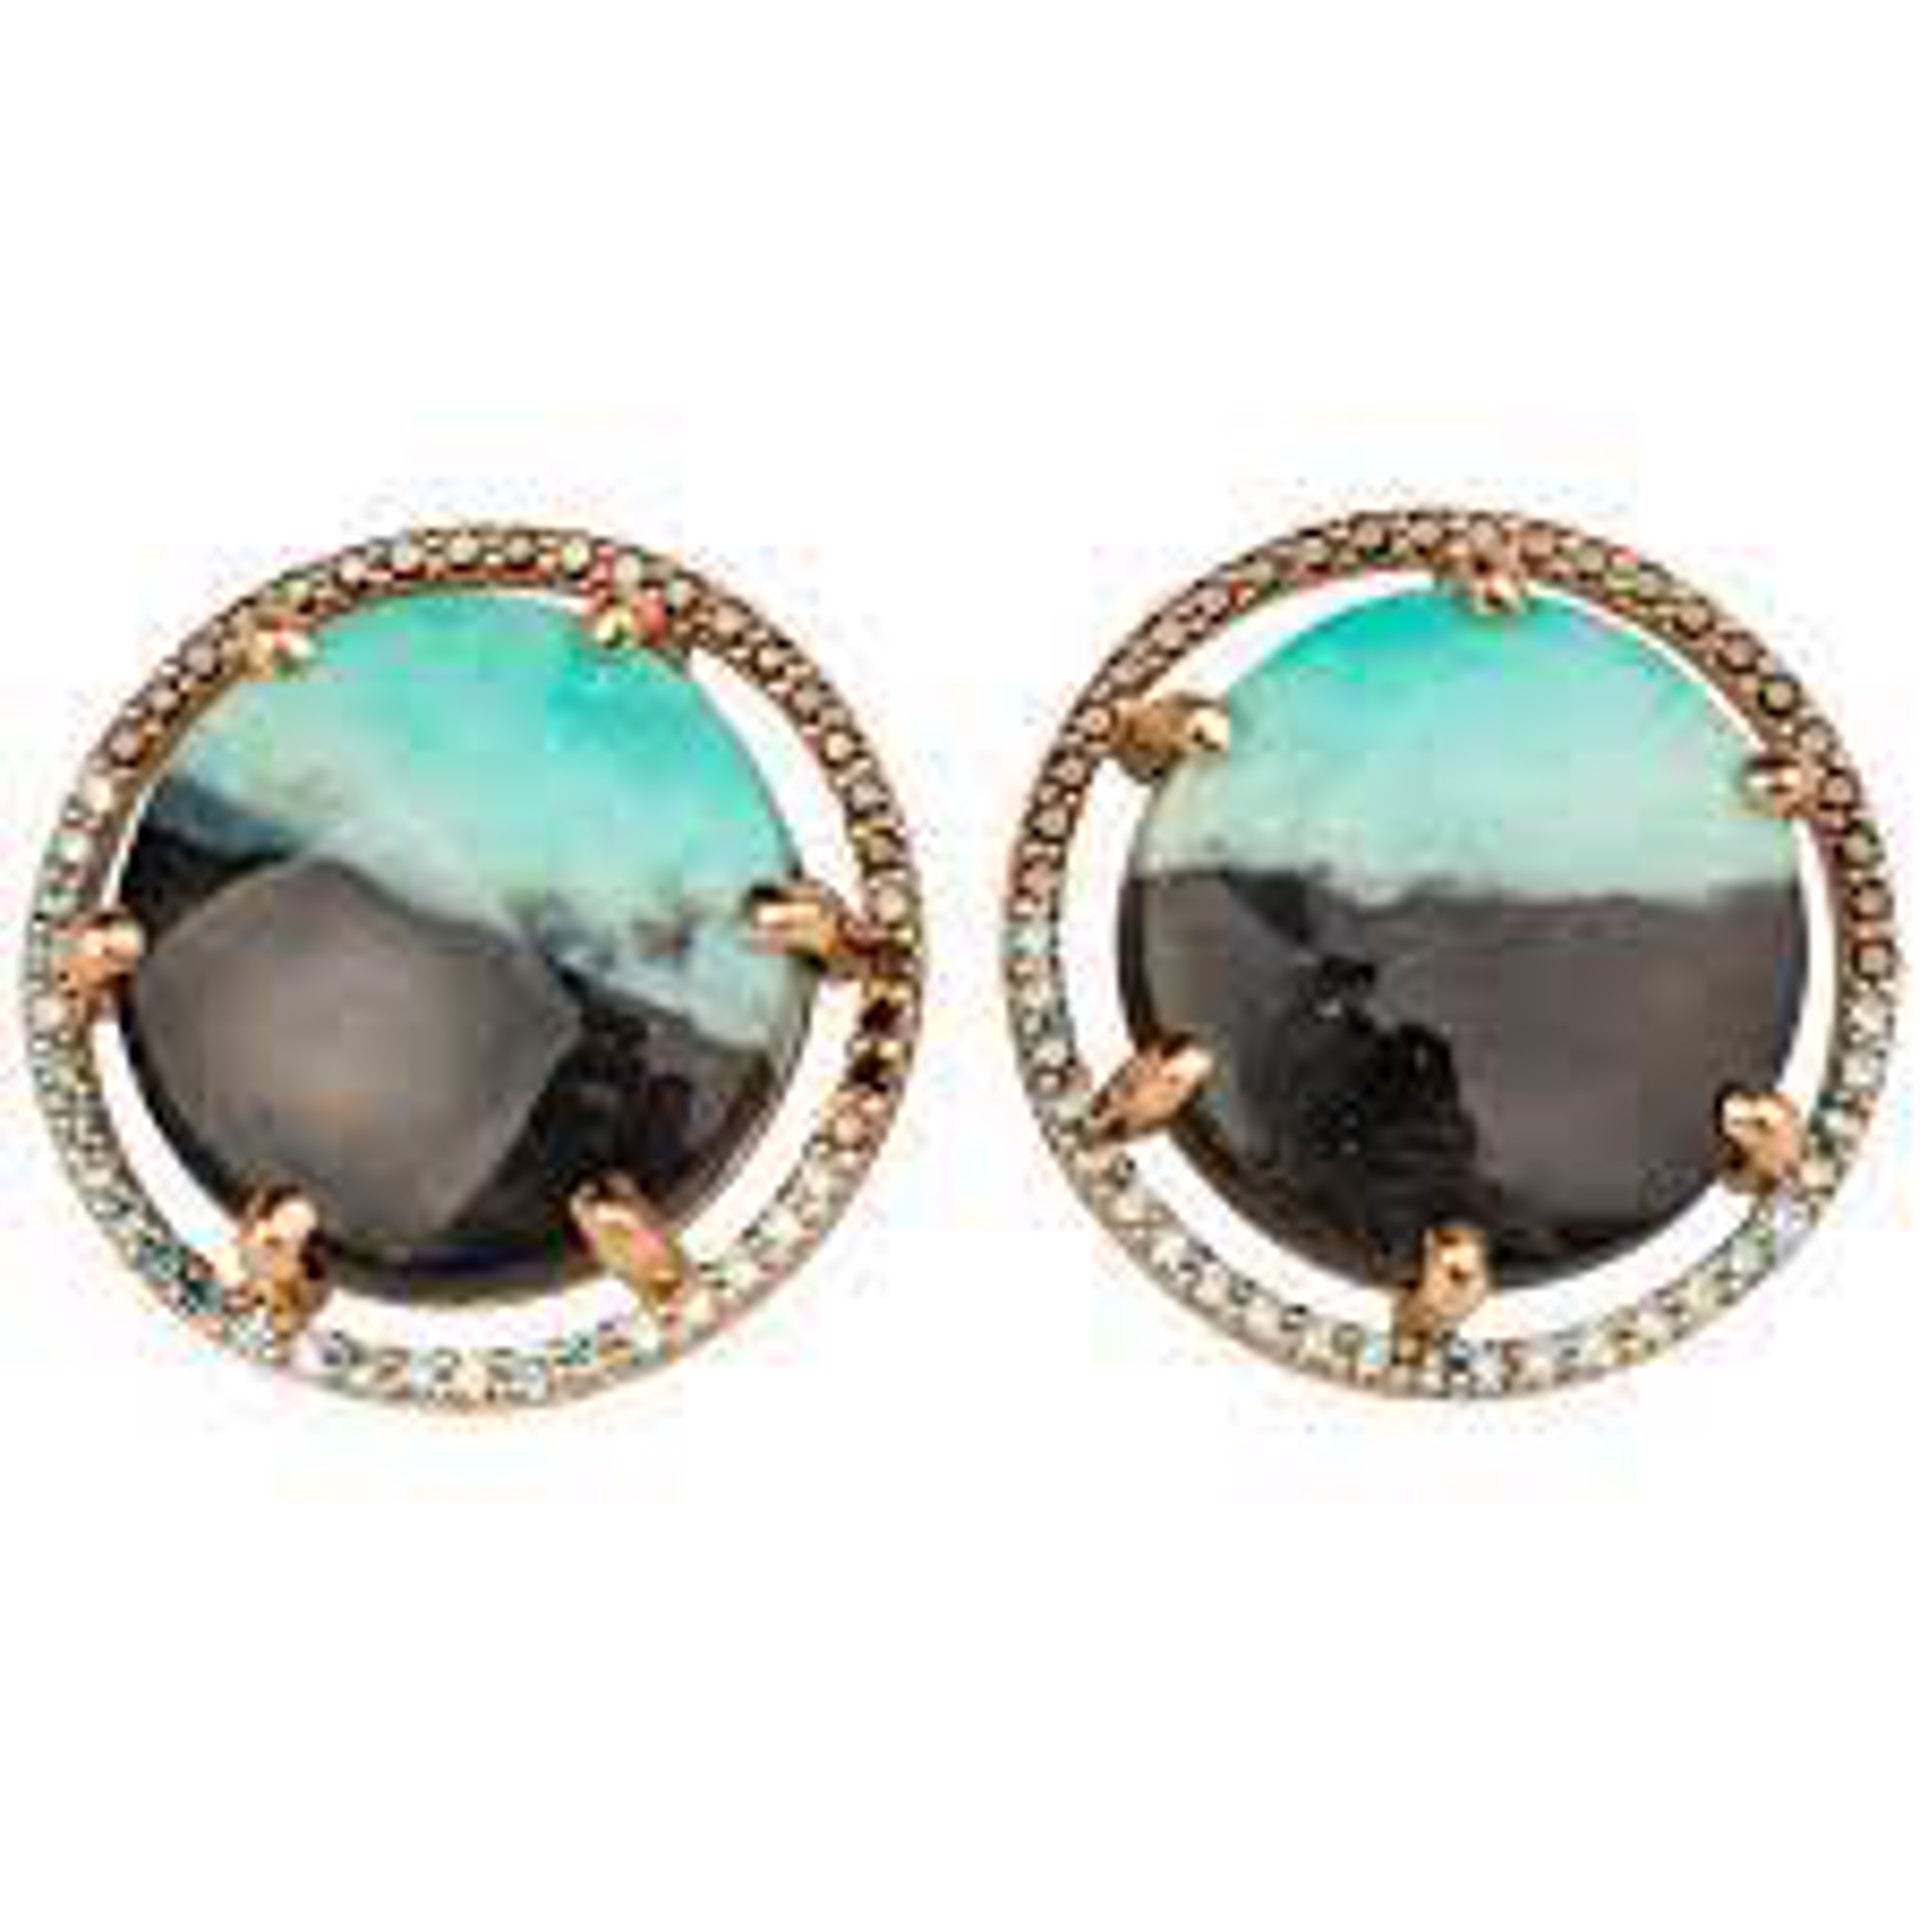 A pair of petrified wood and opal studs set in 18k rose gold, with a halo of .23 carats of aqua blue diamonds and .23 carats of black diamonds by Llyn Strong